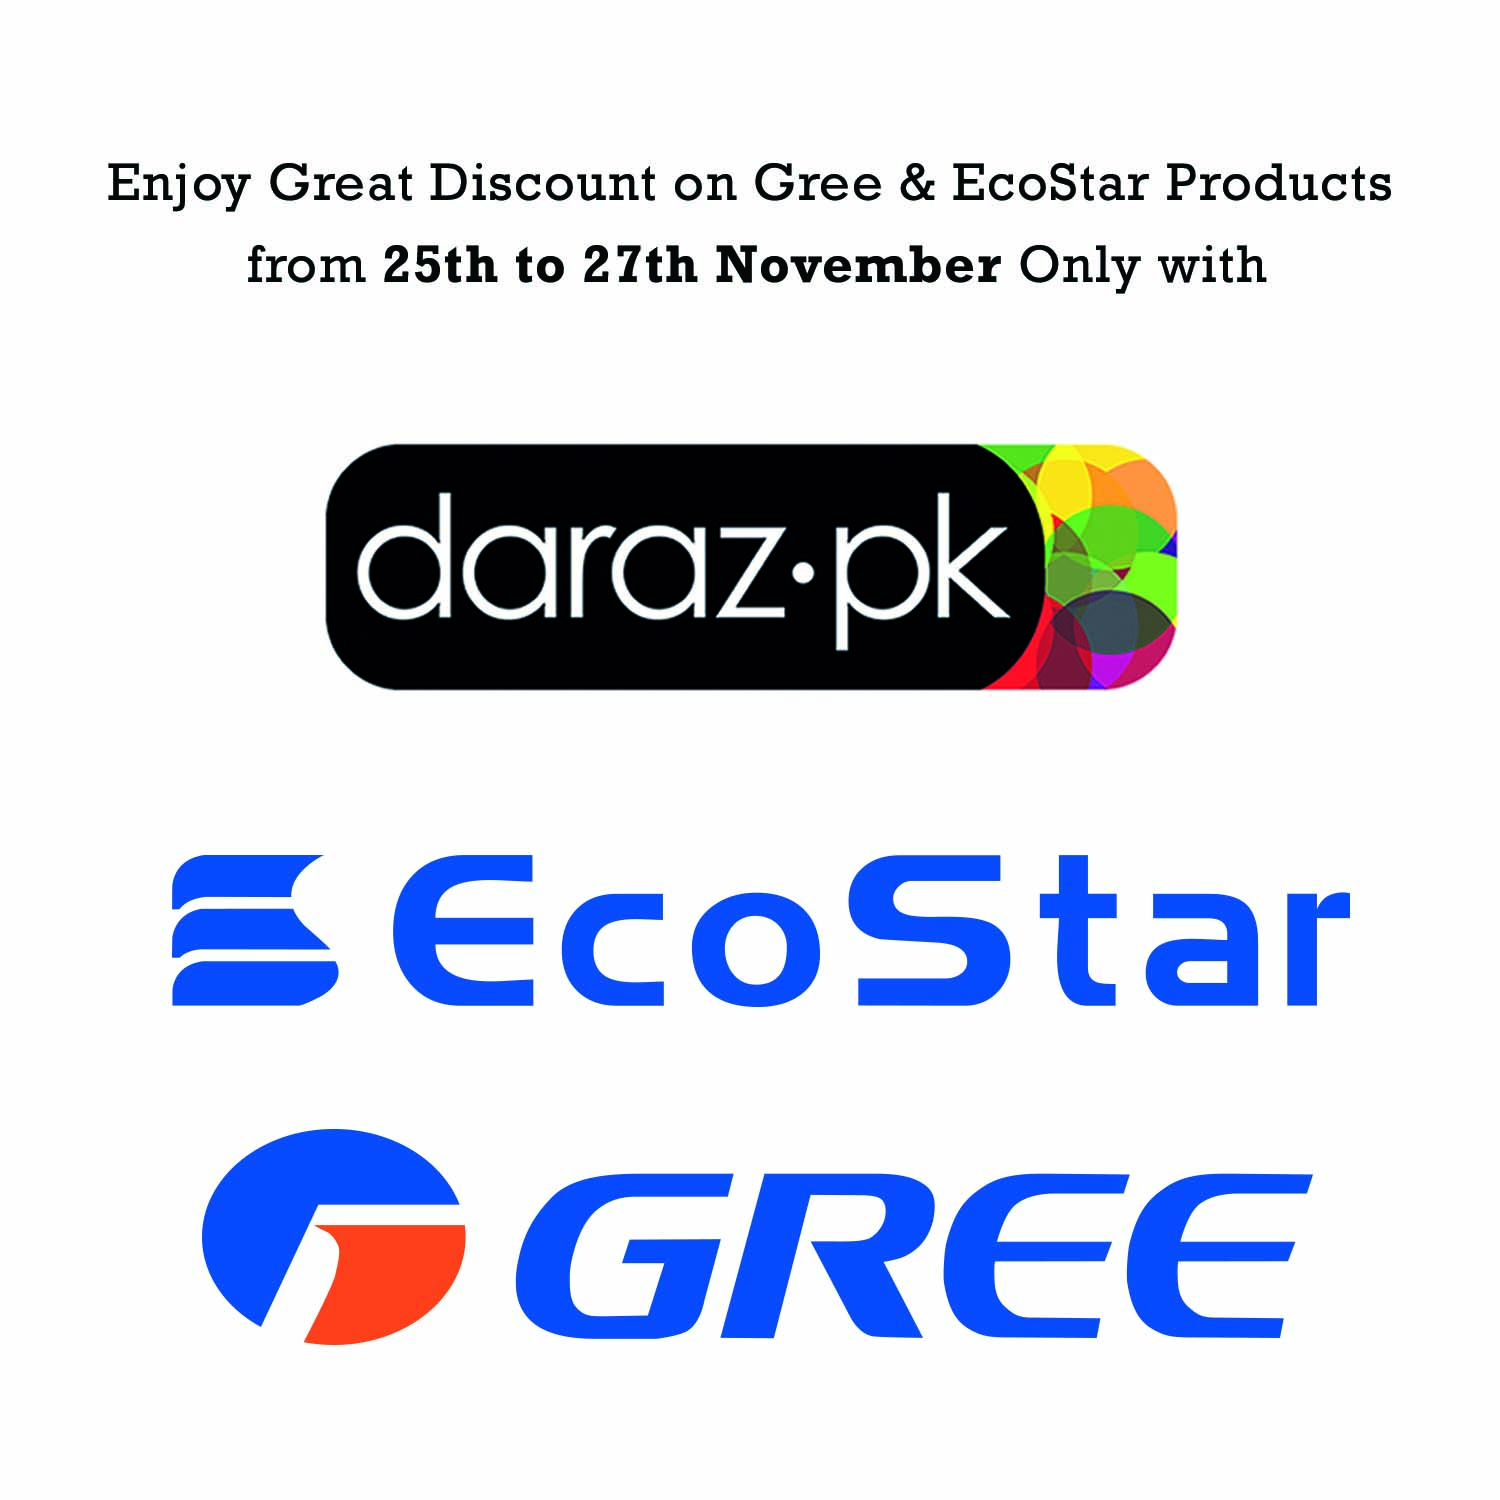 This black Friday Gree & EcoStar offers Exclusive Discounts on daraz.pk